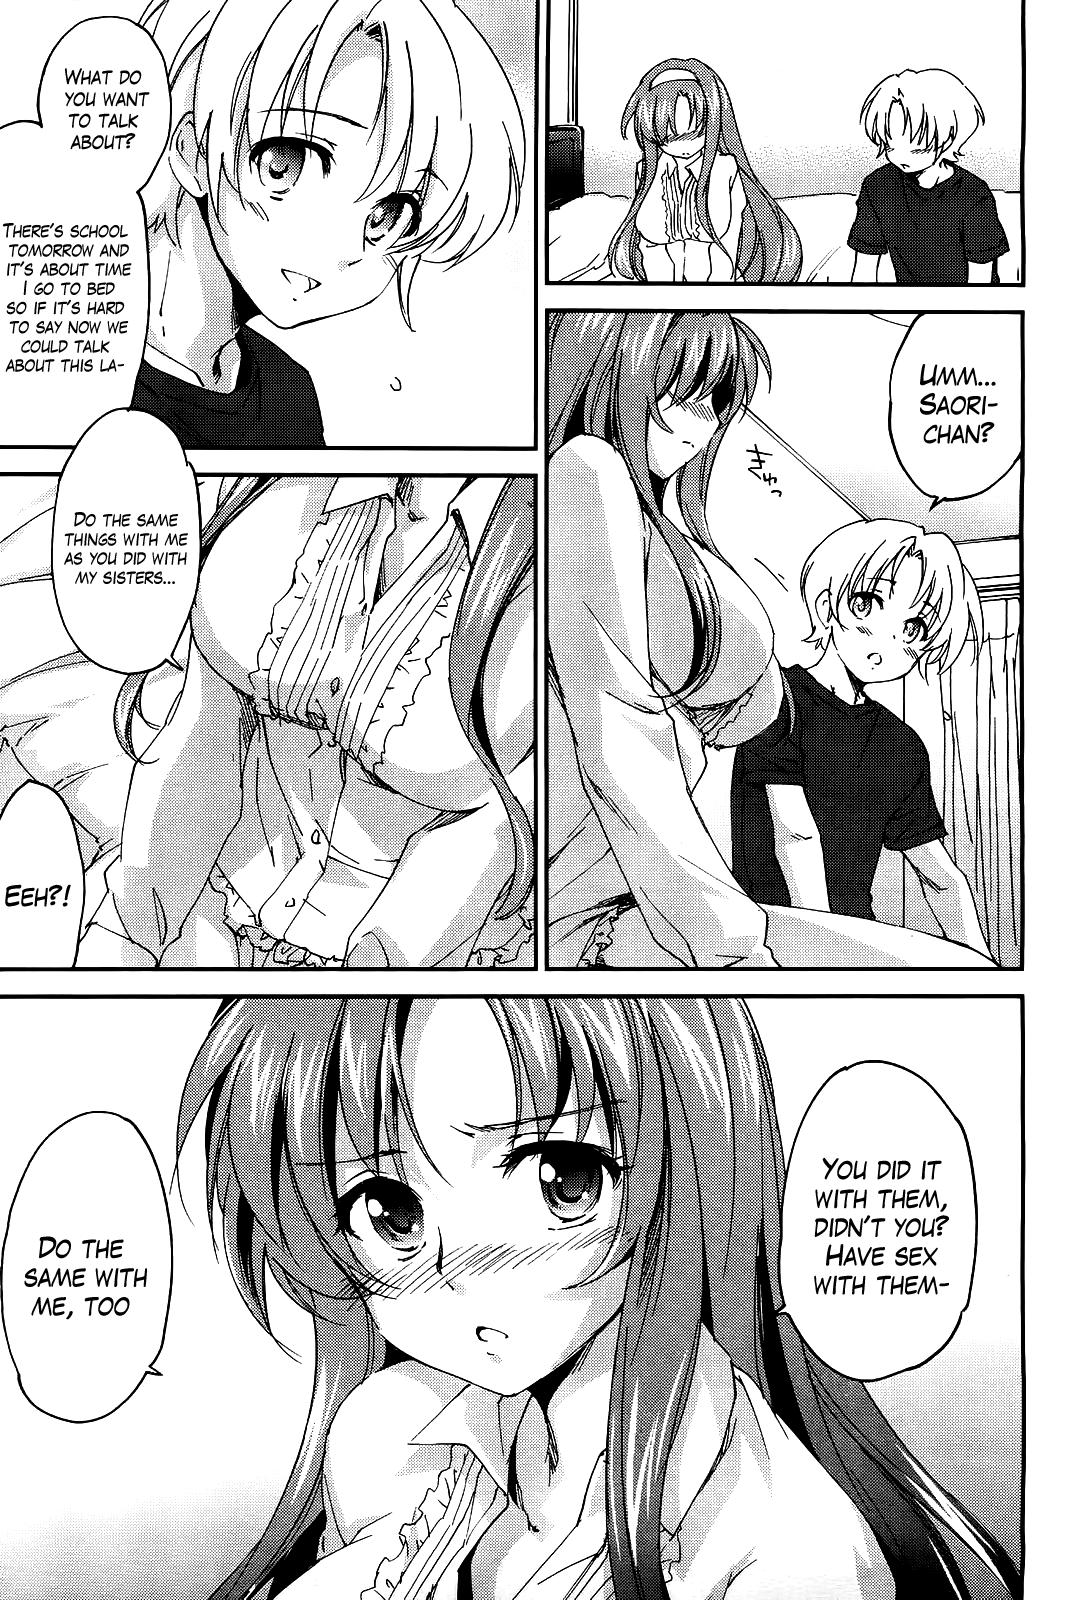 Mexico Onee-chan! Tengoku 4 Ane | Sister Paradise Ch. 4 Housewife - Page 3